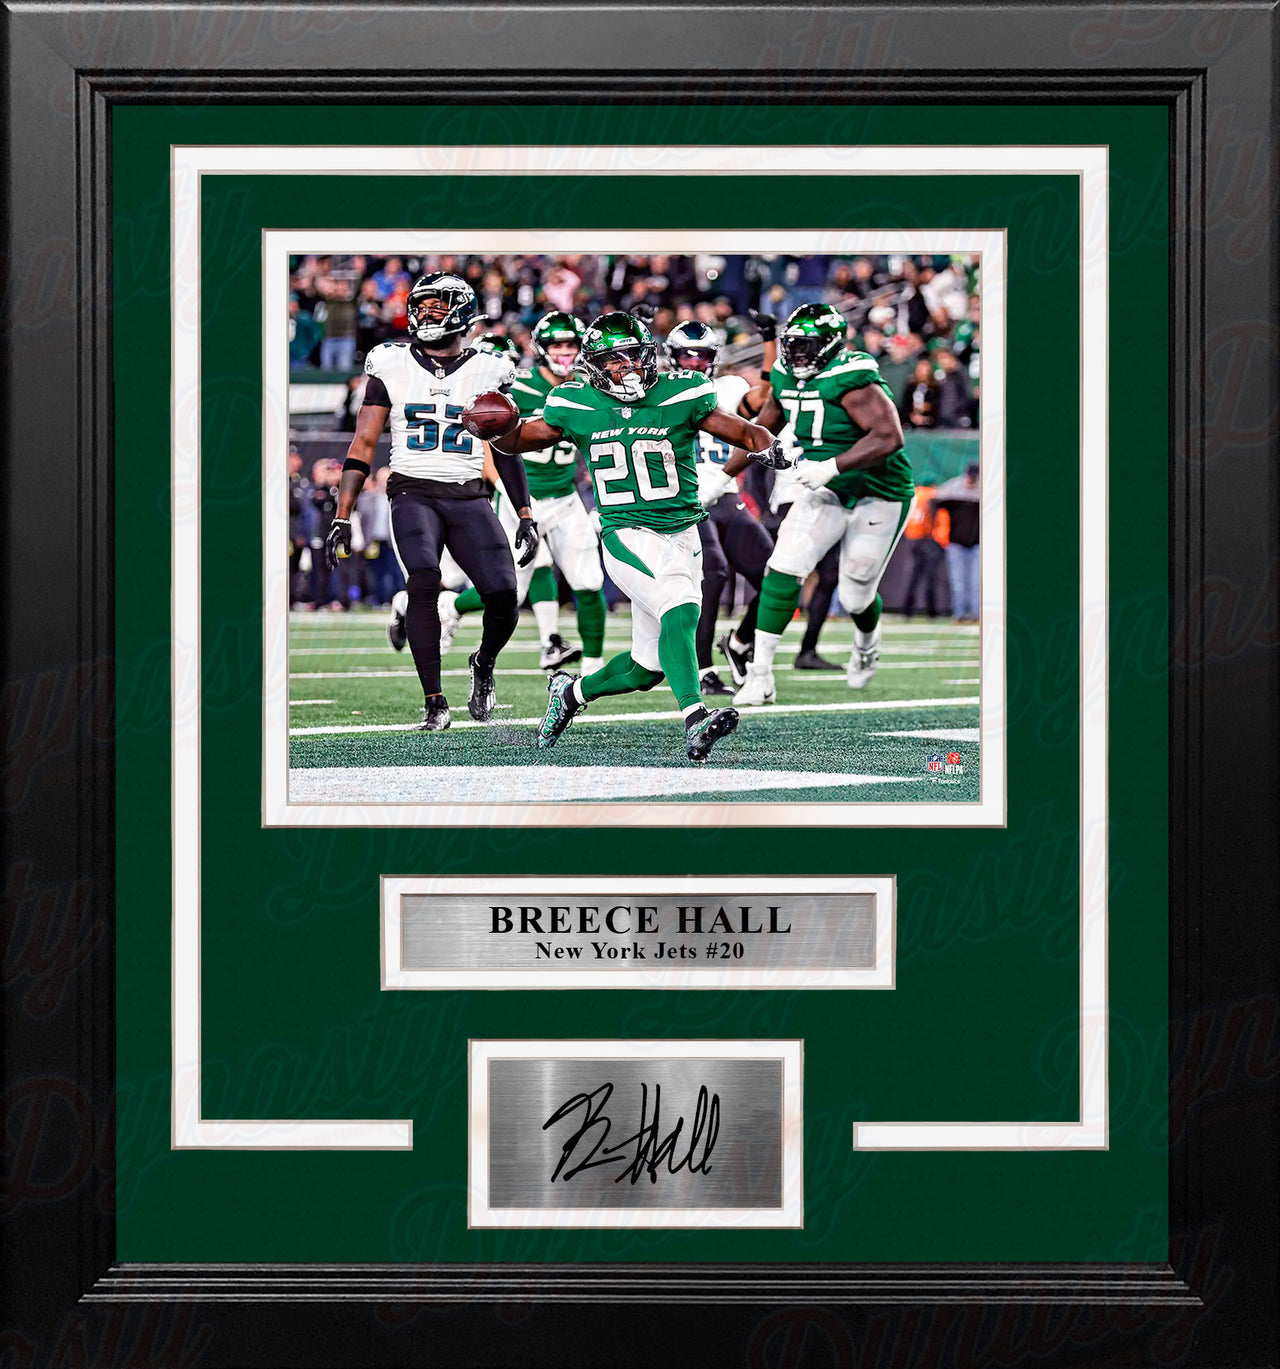 Breece Hall Touchdown Celebration New York Jets 8x10 Framed Football Photo with Engraved Autograph